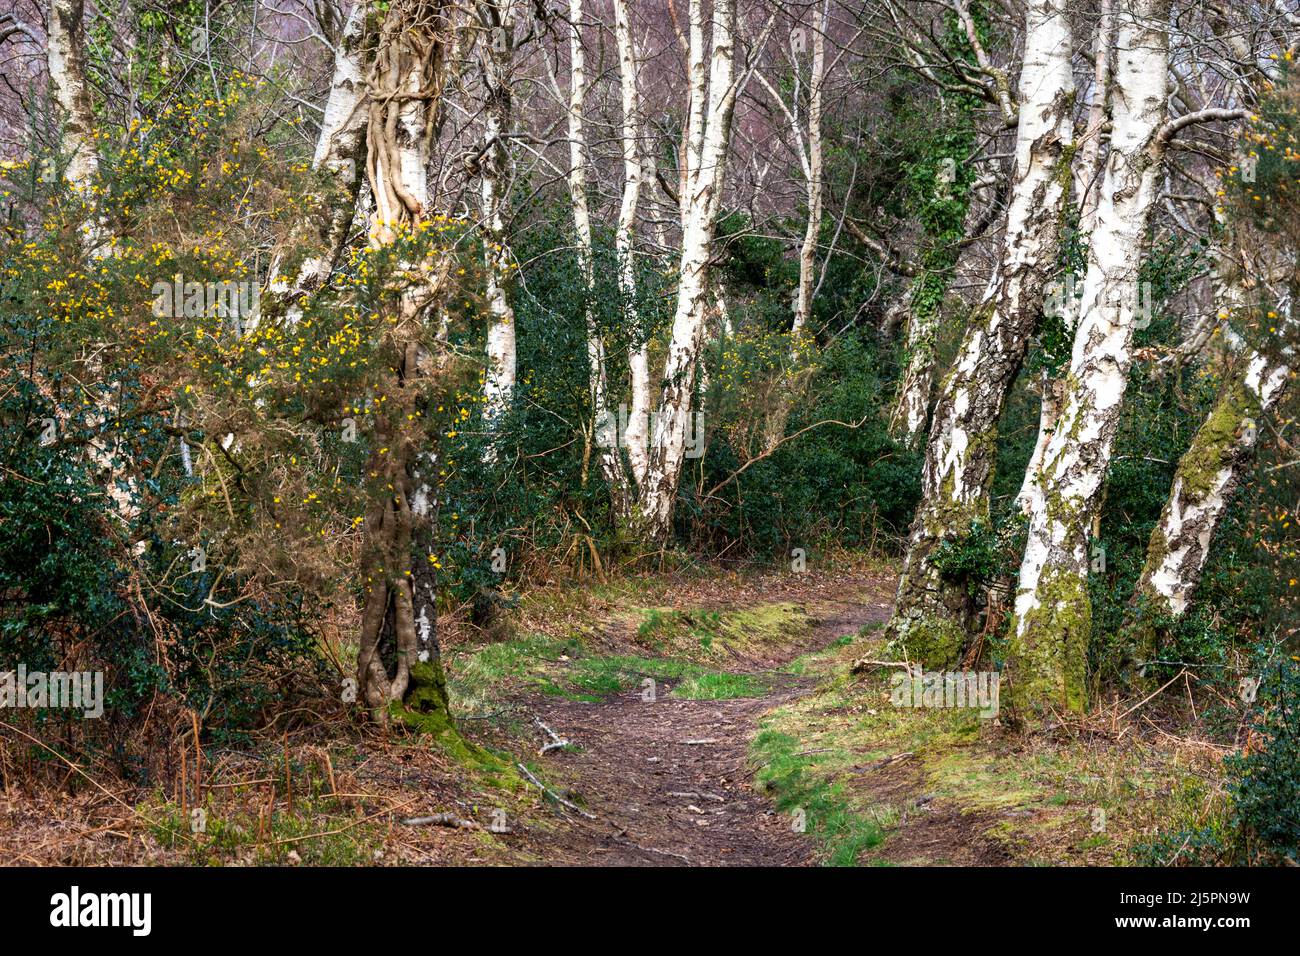 Mature Silver Birch trees in a woodland setting Stock Photo